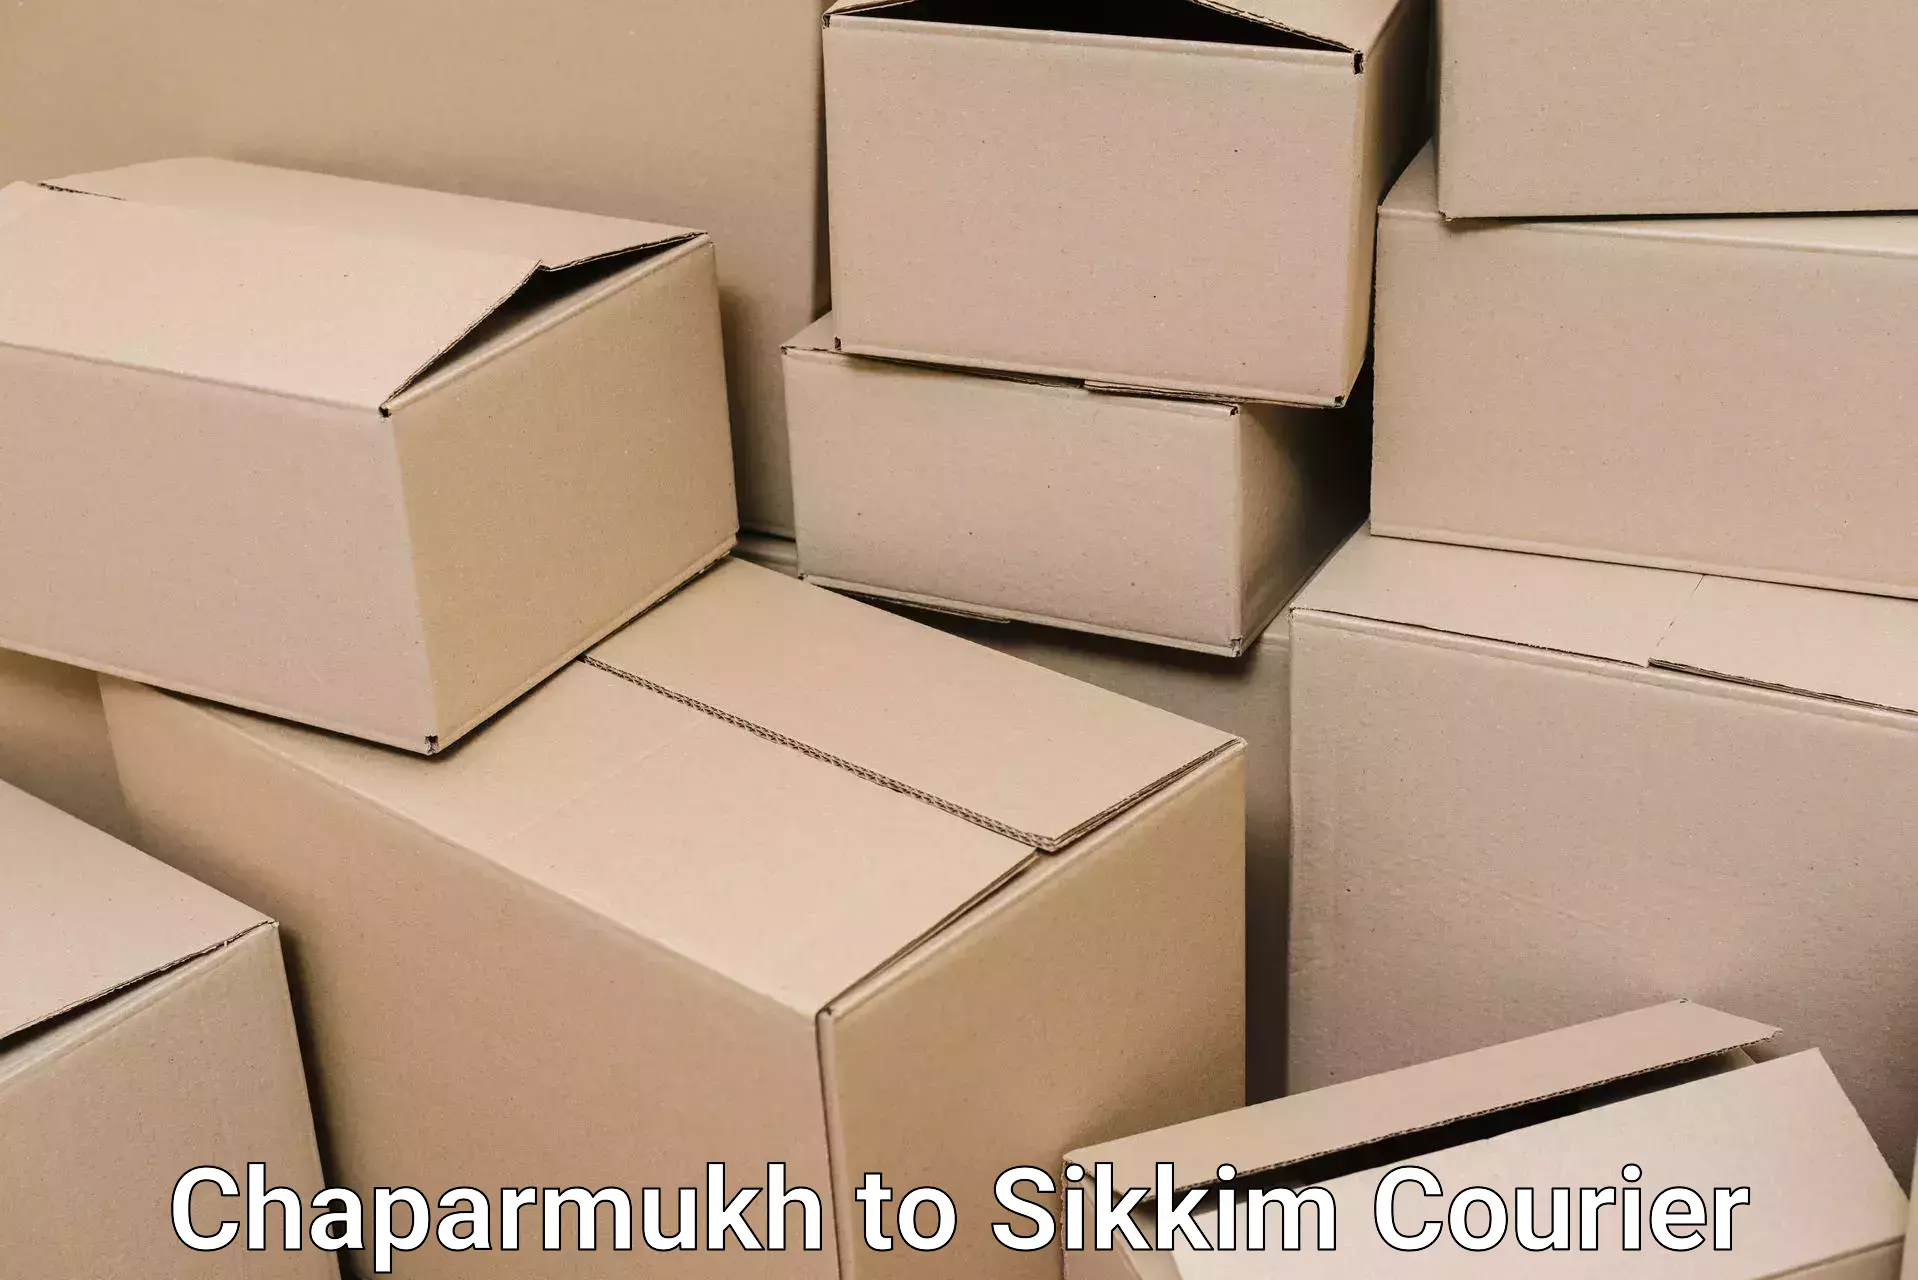 Efficient packing and moving Chaparmukh to South Sikkim